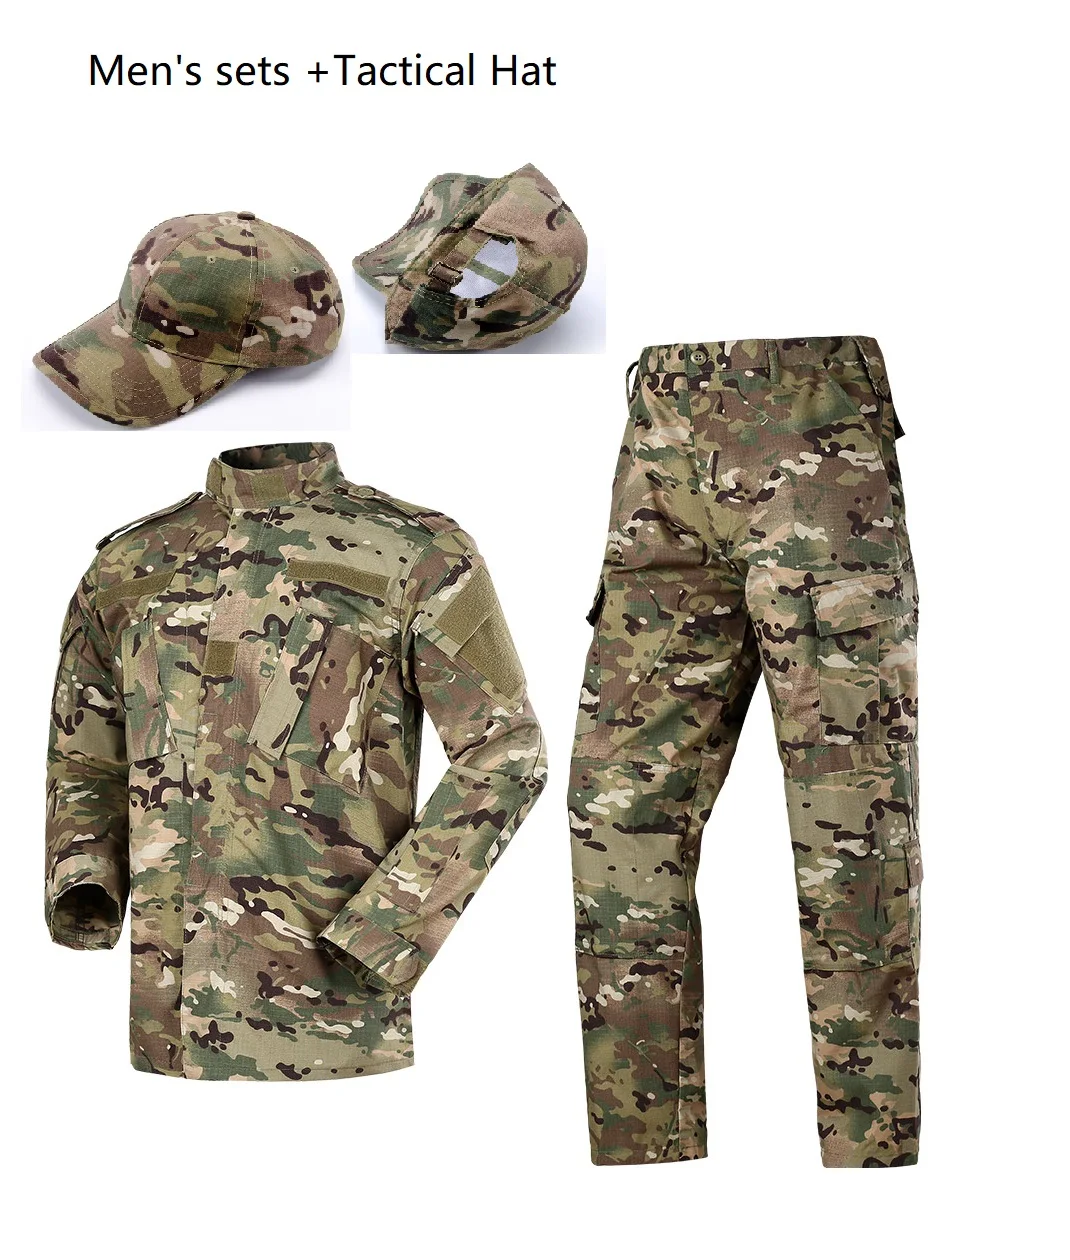 Men's Sets Multicam U.S Army Uniform Ribstop Military Uiforms With Tactical Baseball Hats